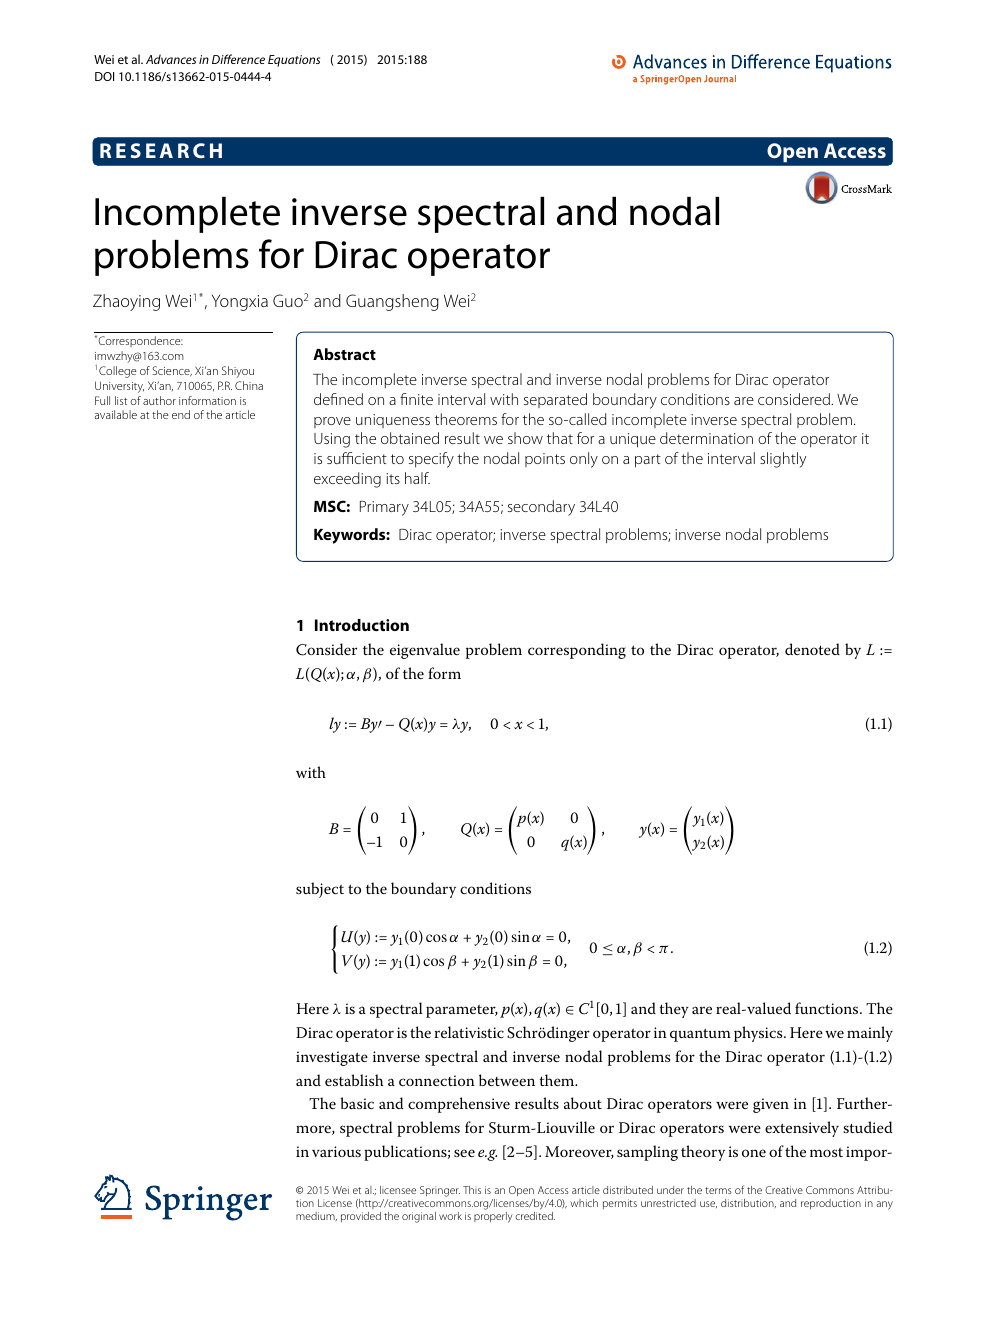 Incomplete Inverse Spectral And Nodal Problems For Dirac Operator Topic Of Research Paper In Mathematics Download Scholarly Article Pdf And Read For Free On Cyberleninka Open Science Hub